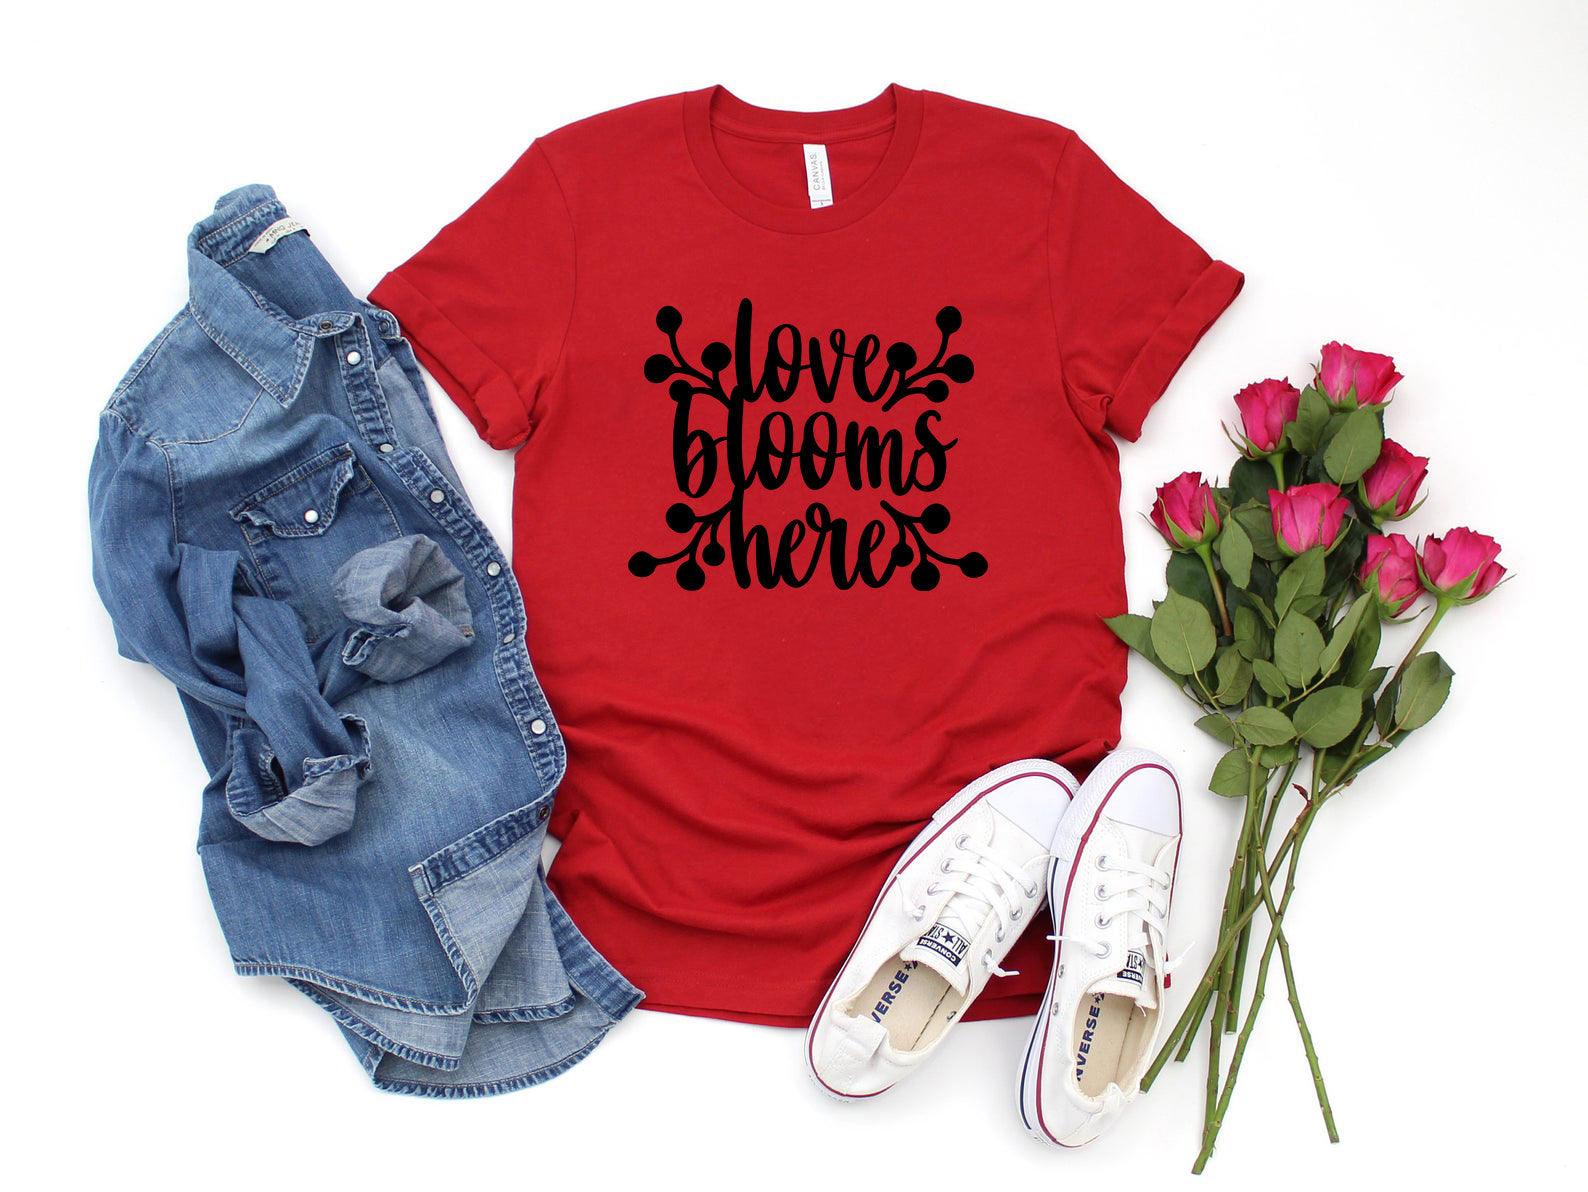 Love Blooms Here Shirt - VirtuousWares:Global